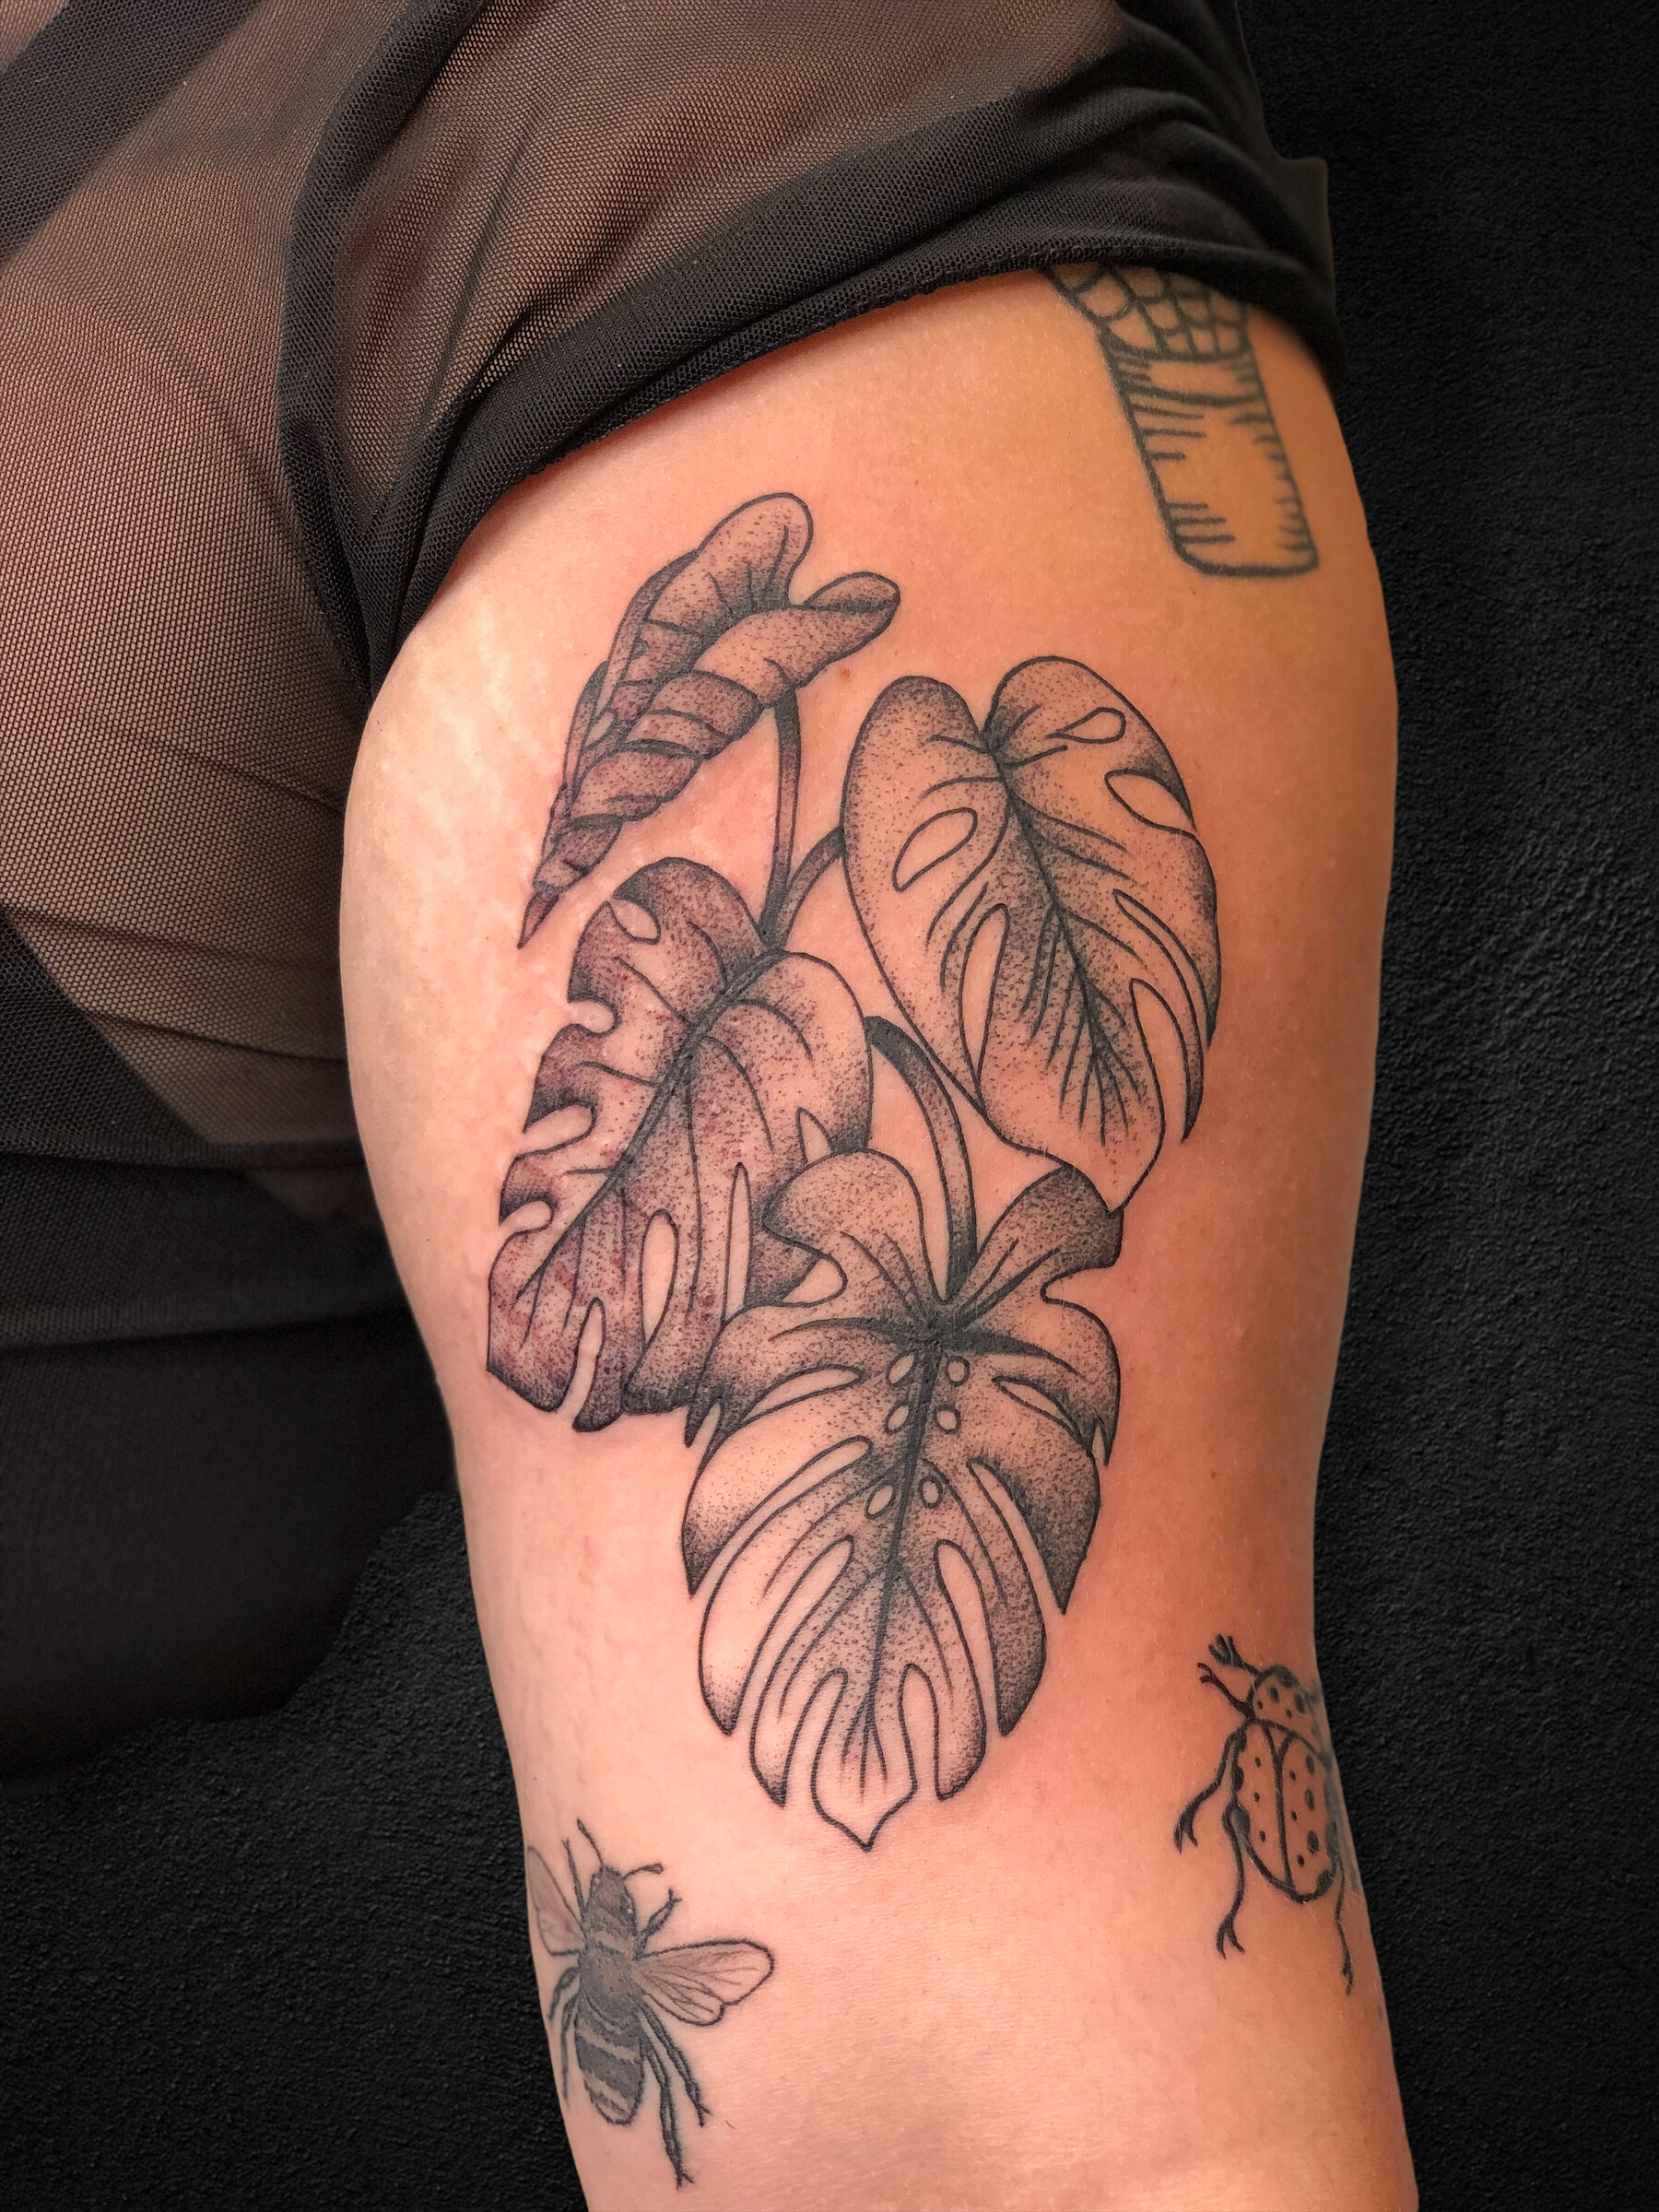 GOOD HAND TATTOO  Where our Plantmamas  papas at  Wed  love to tattoo your favorite houseplants  monstera  Olive done by  keanmendez   Facebook